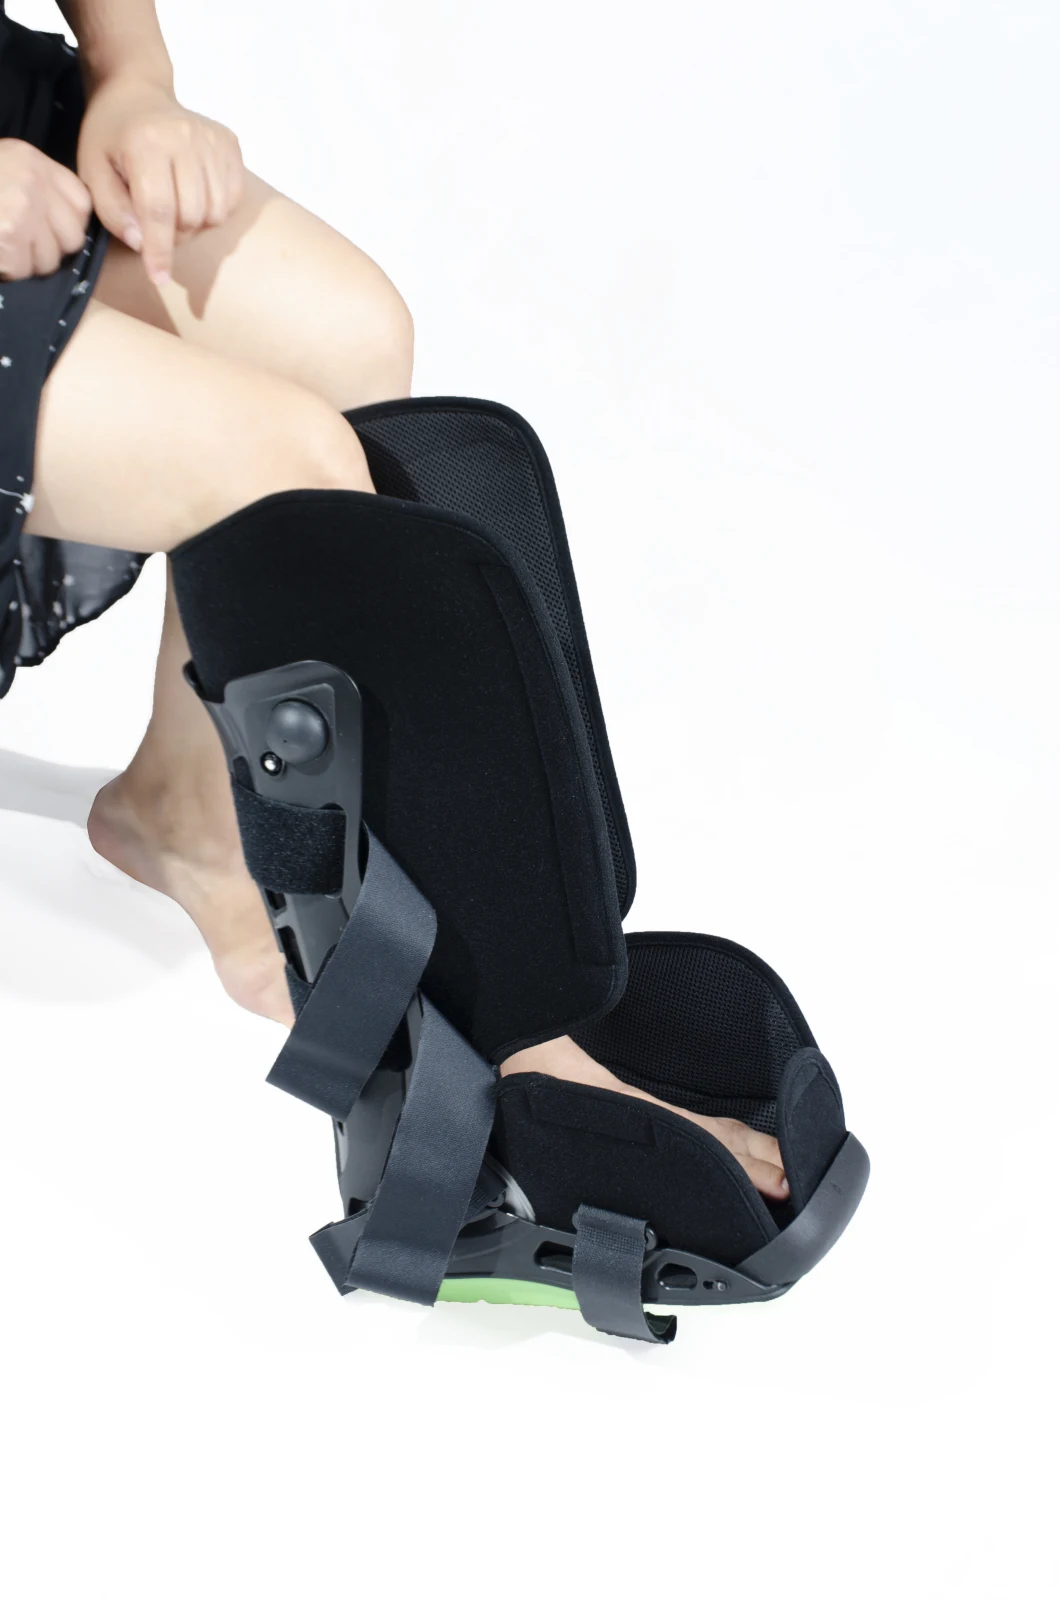 Walker Boots Orthopedic Ankle Cam Walker Brace and Support with Ce FDA